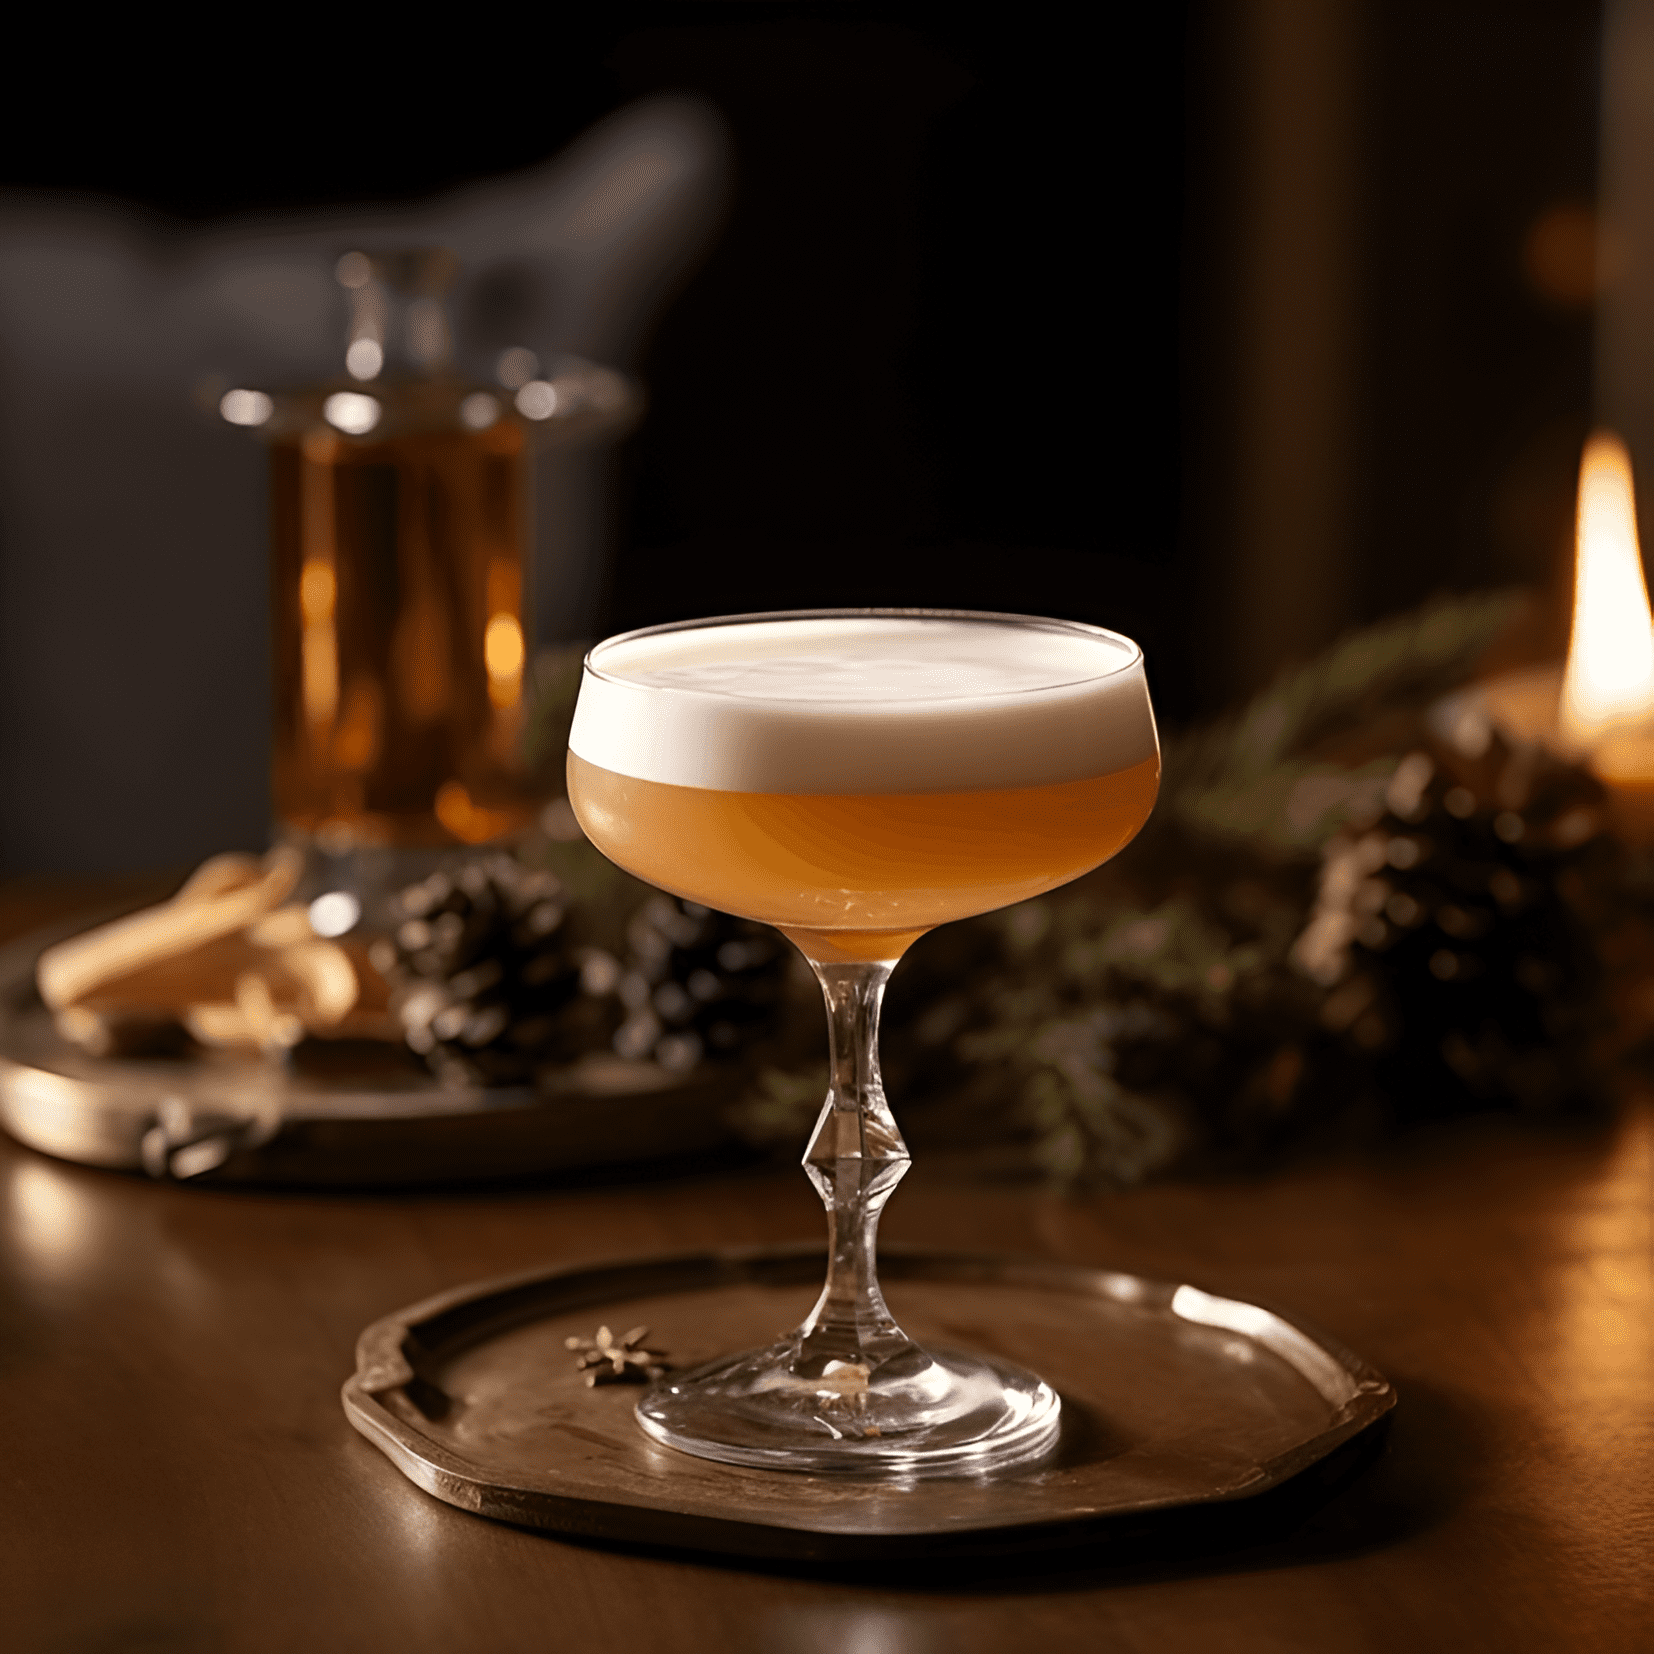 The Bourbon Flip has a rich, creamy, and smooth taste with a hint of sweetness from the simple syrup. The bourbon adds a warm, oaky, and slightly spicy flavor, while the egg gives the drink a frothy and velvety texture.